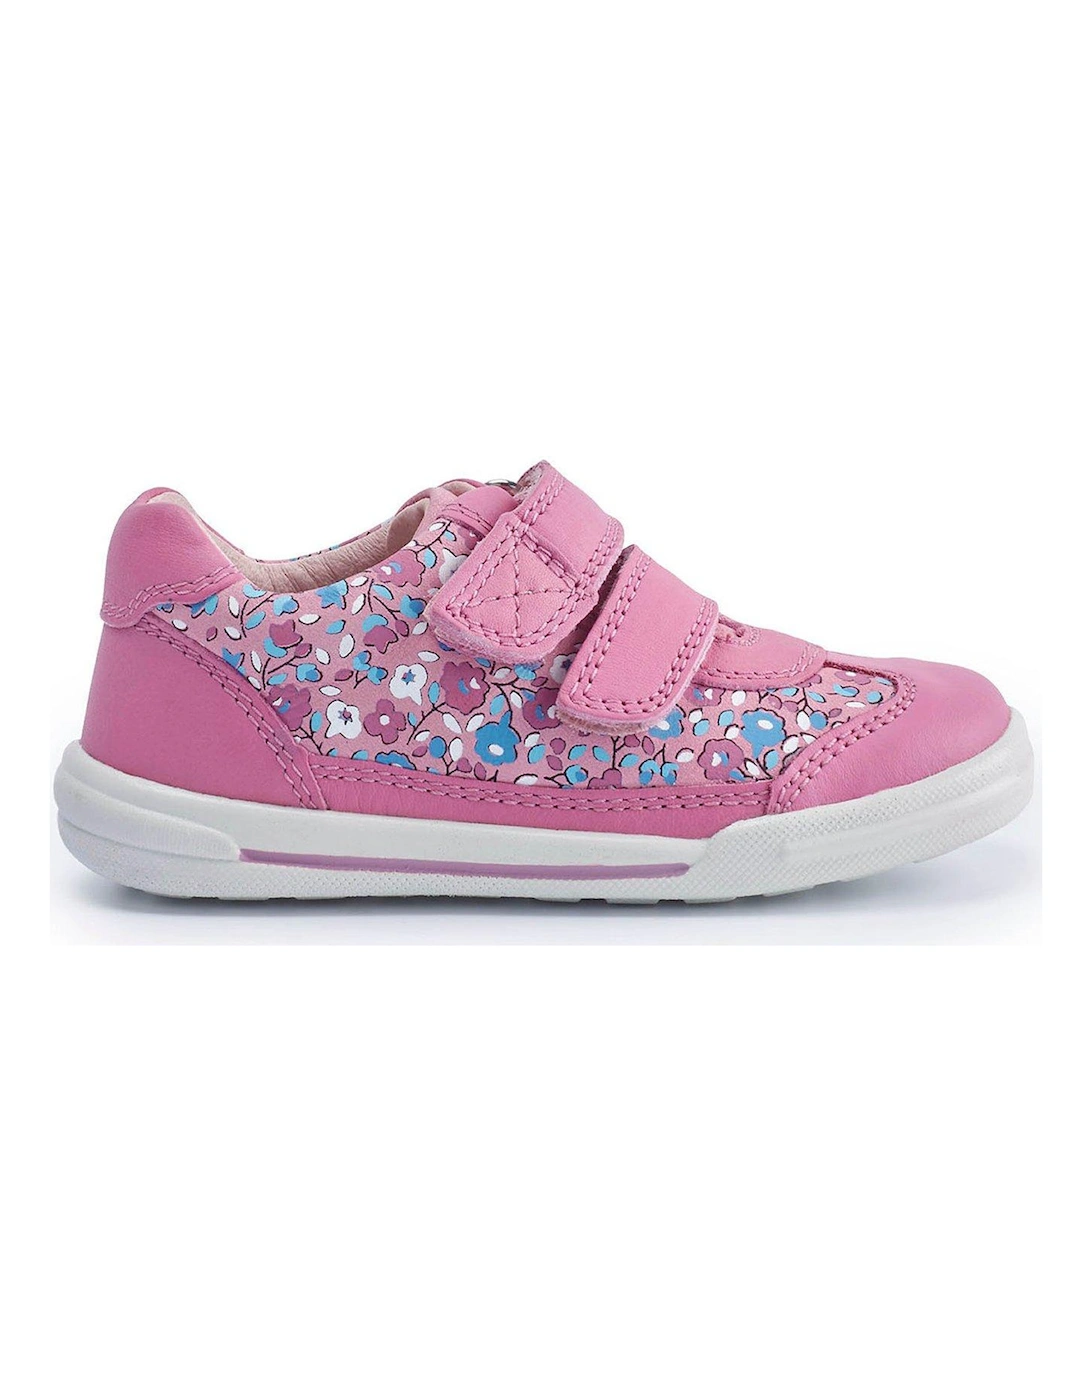 X Jojo Maman Bébé Chums Pink Floral Print Leather Double Riptape Girls Trainers - Pink, 2 of 1